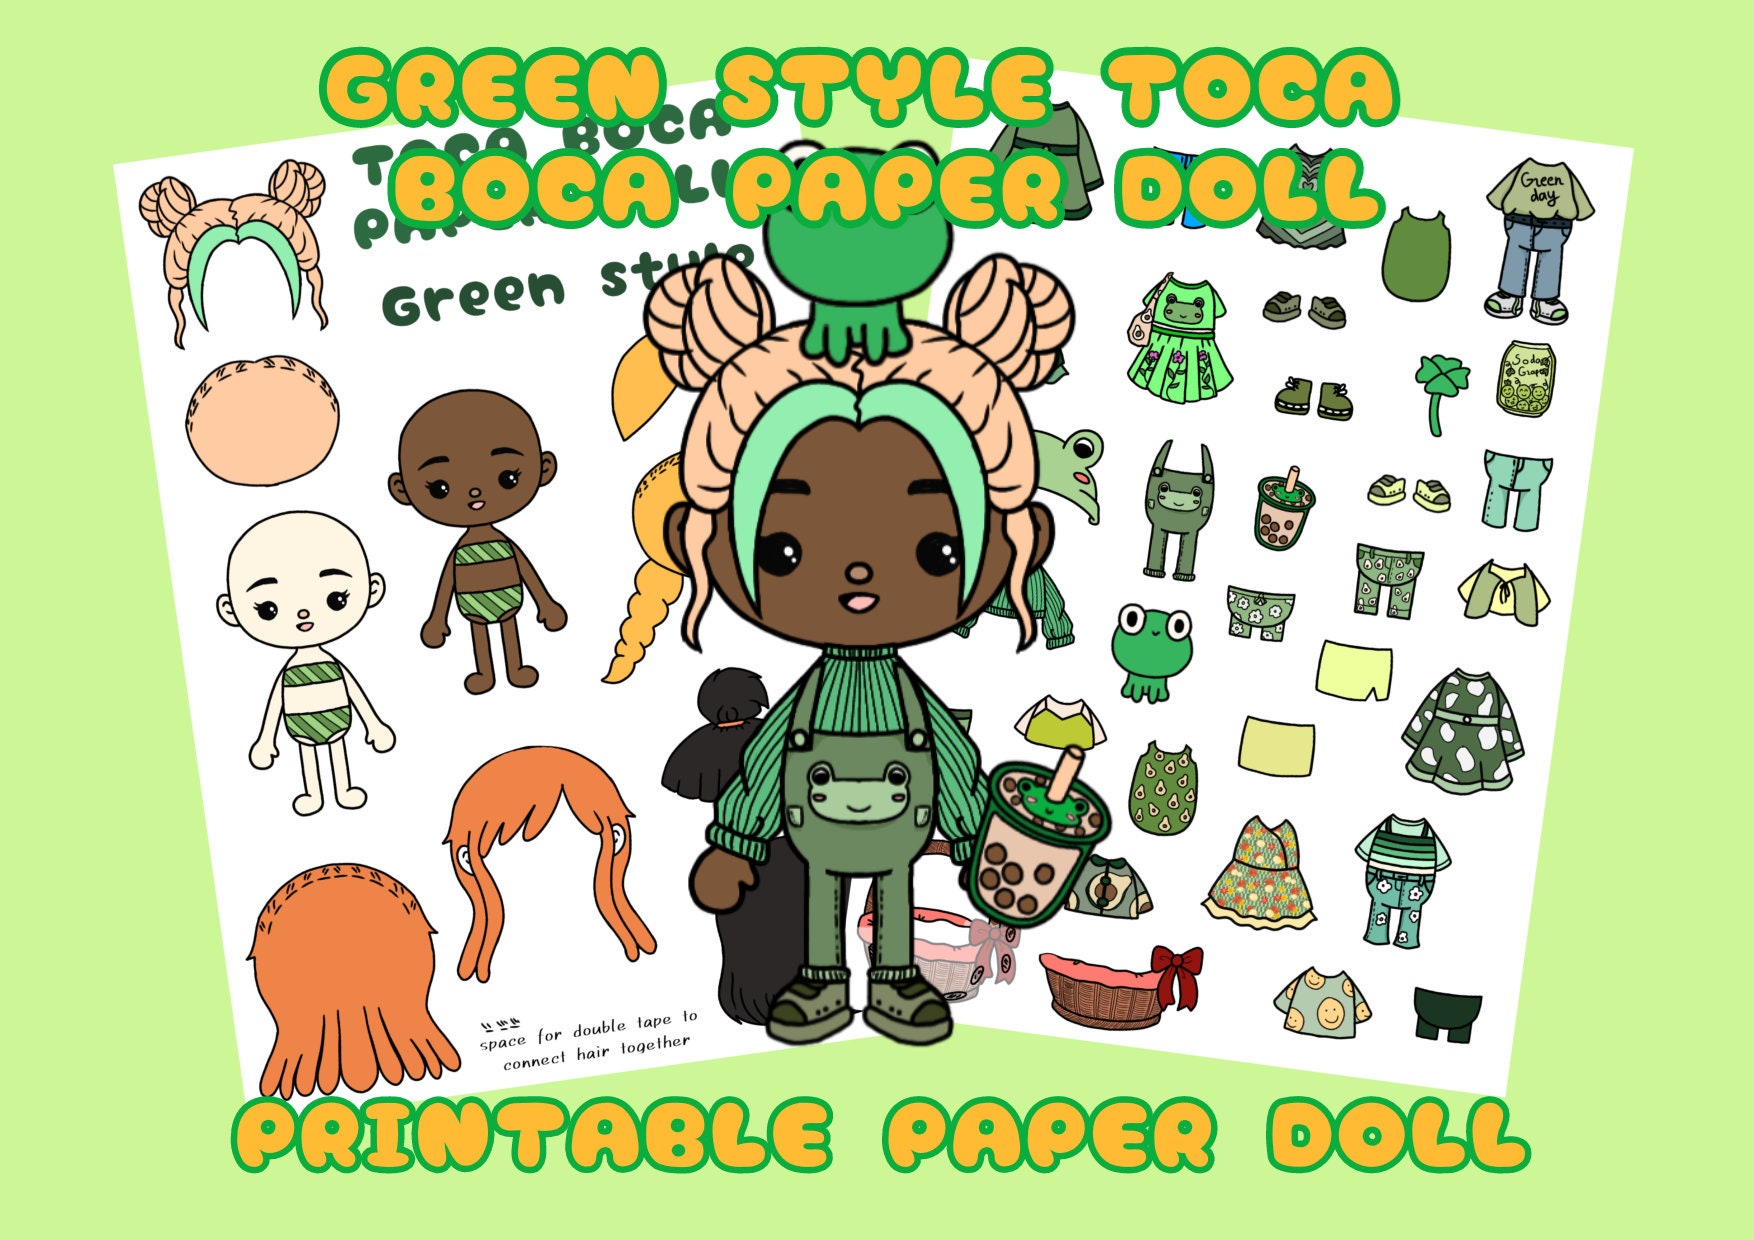 Printable Toca Boca Paper Doll Green Style / Dress up Doll / 